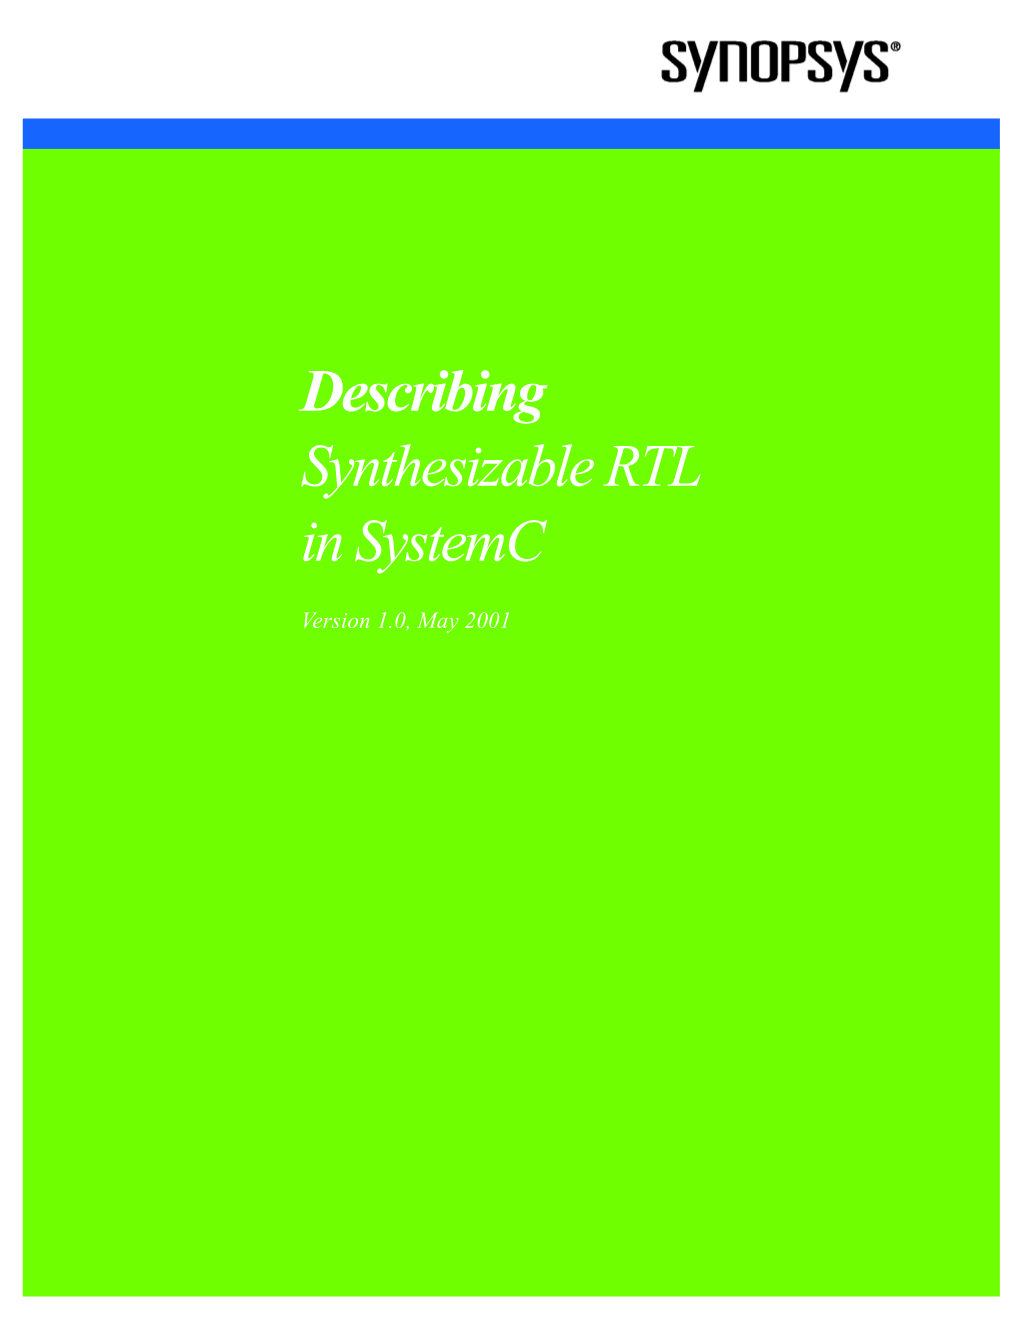 Describing Synthesizable RTL in Systemc